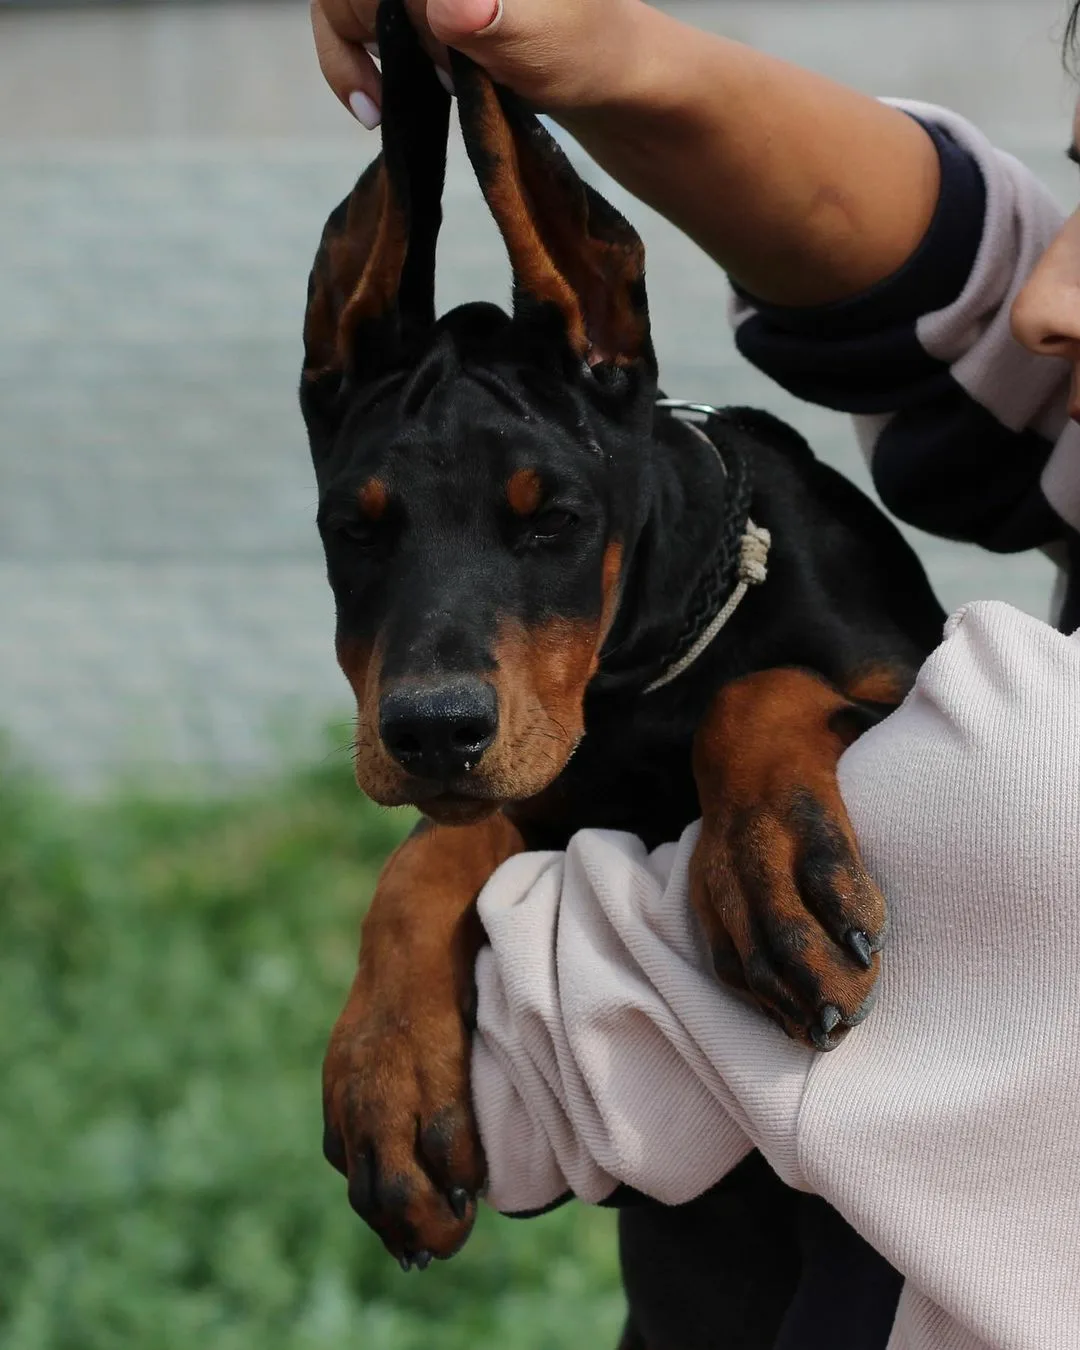 Finding a Reputable Doberman Breeder: Questions to Ask and Red Flags to Watch For